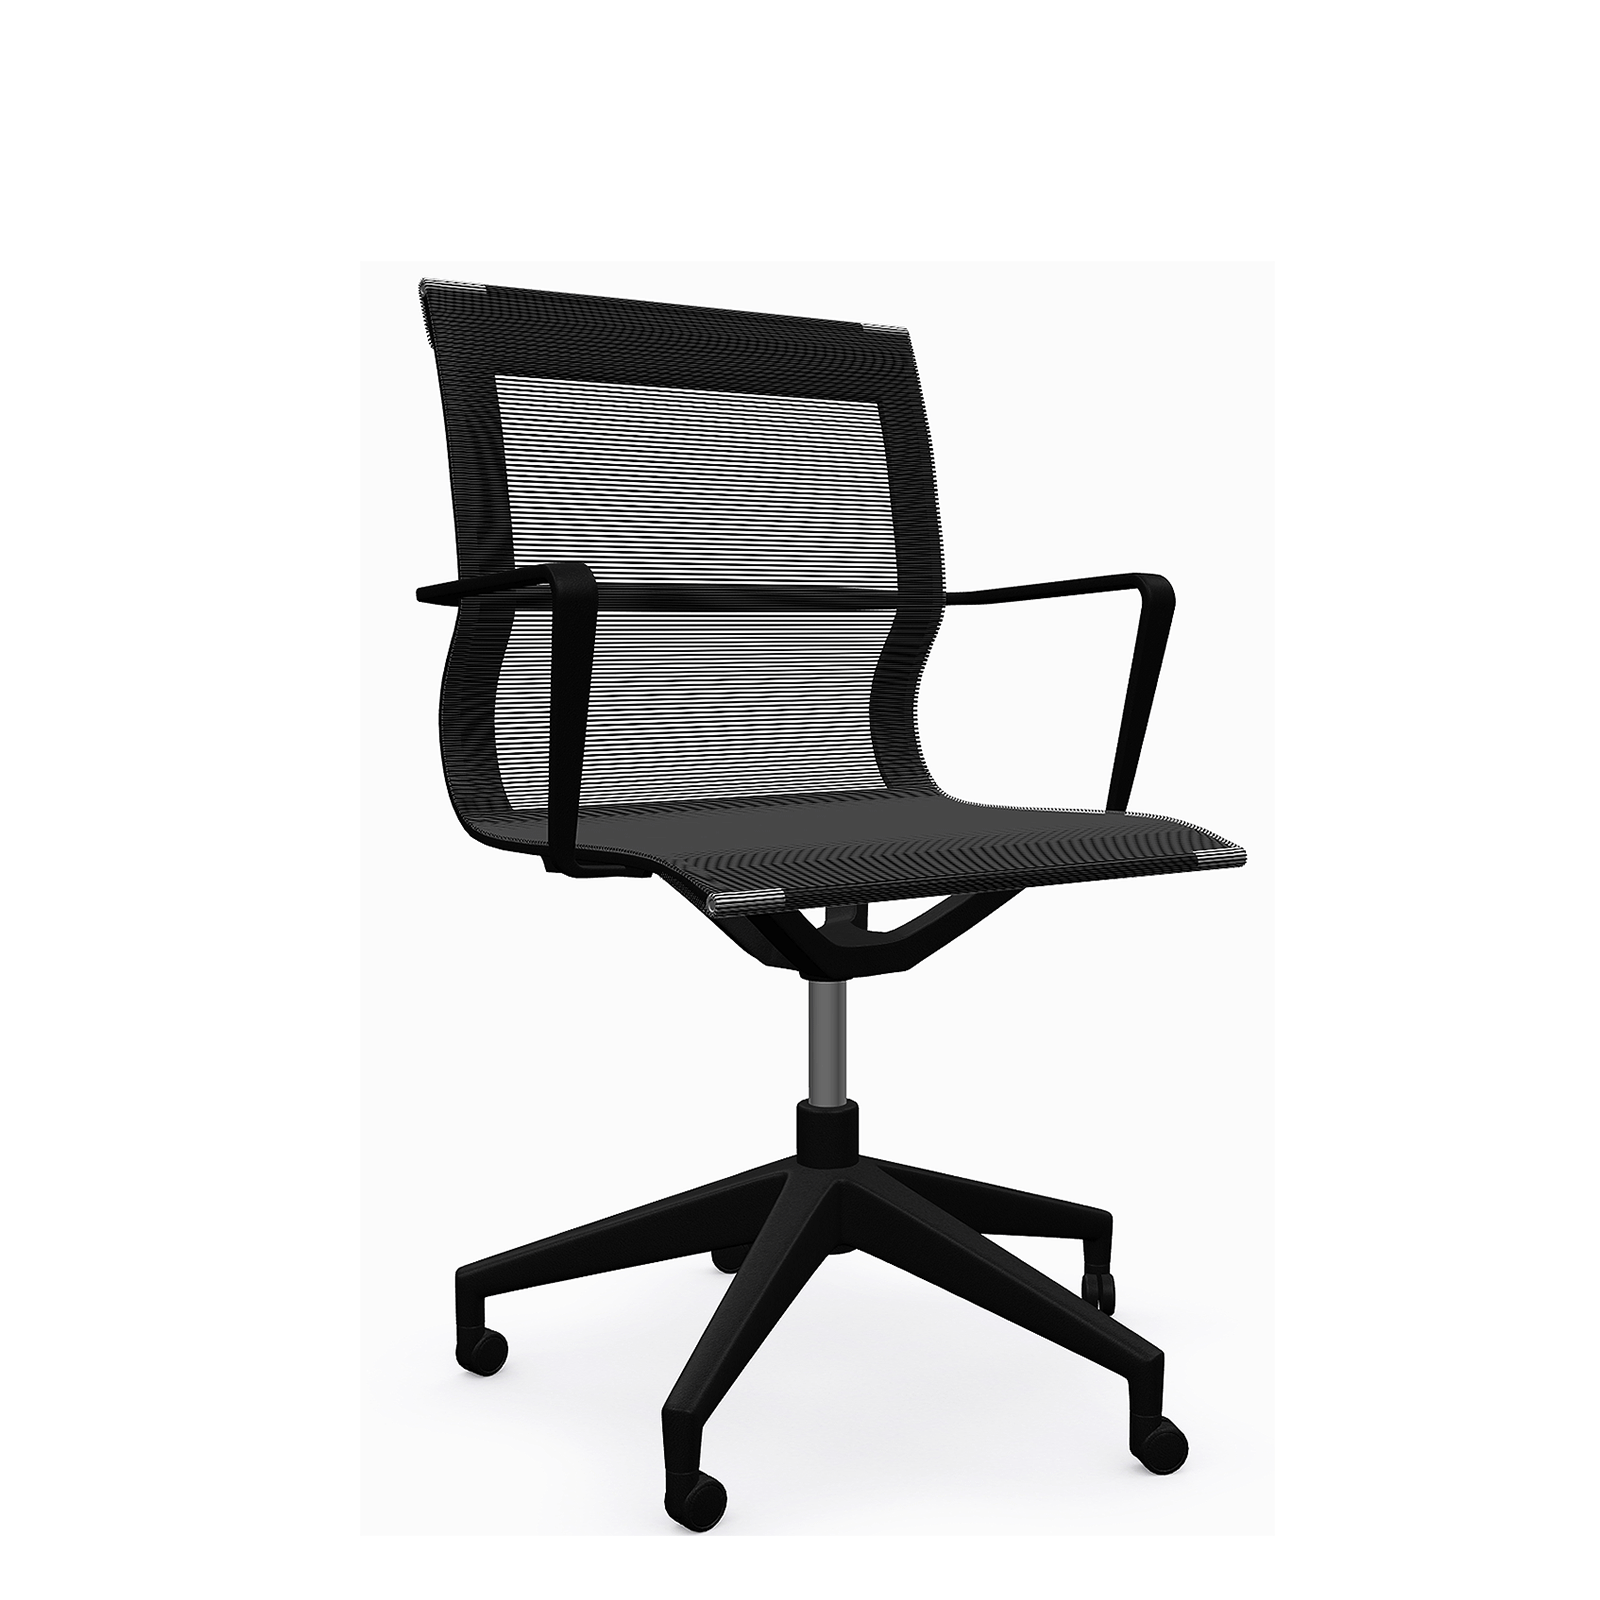 Eurotech Kinetic Chair: The perfect chair for your dynamic workspace